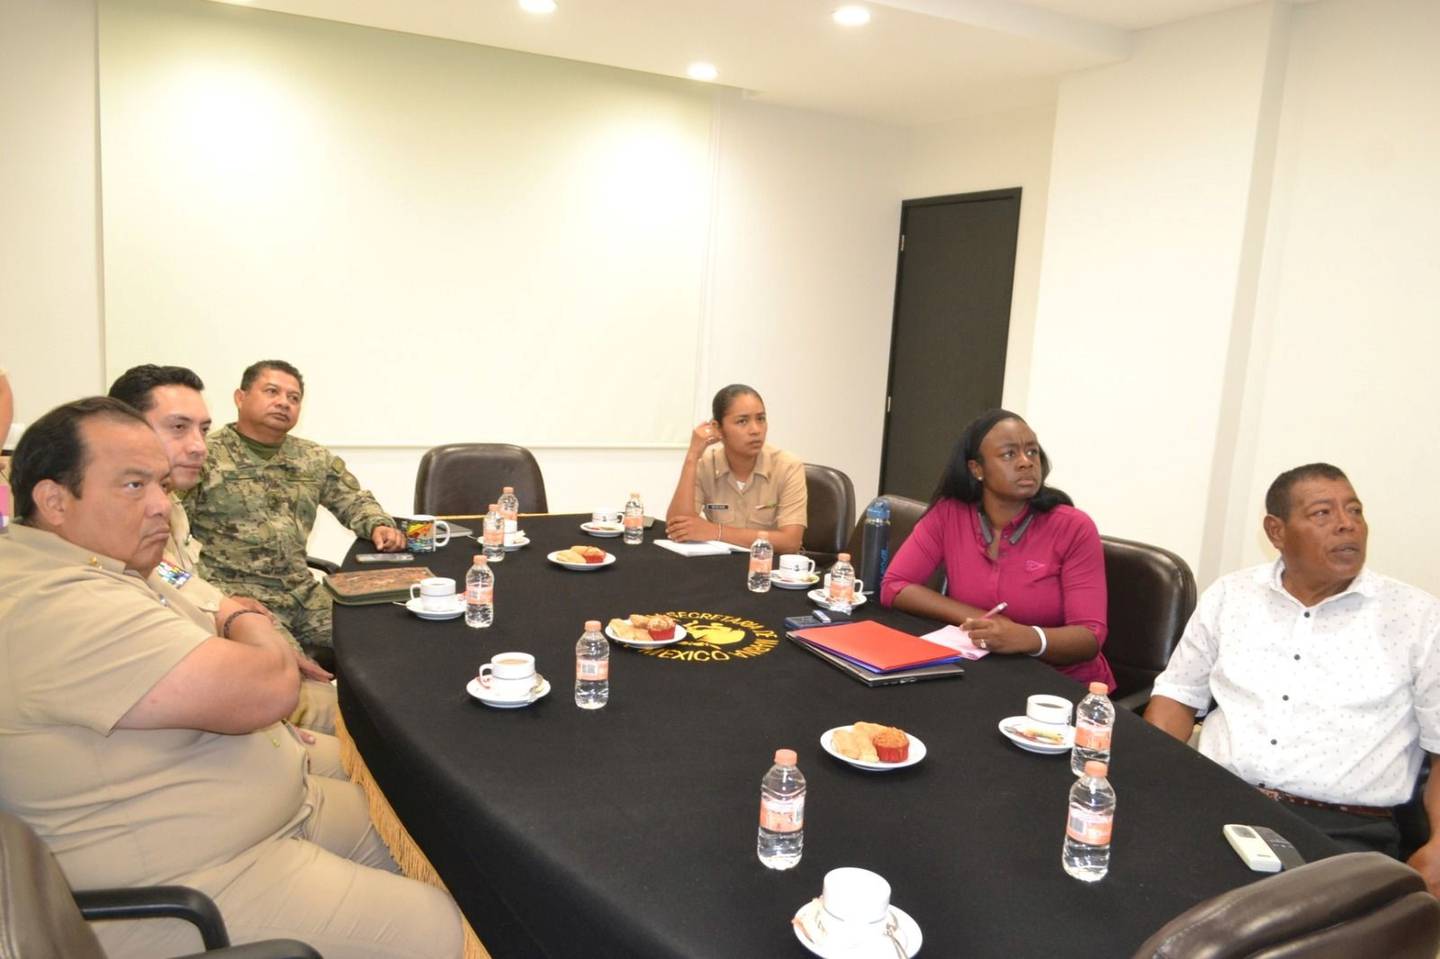 Jacqueline “Tori” Lawson met with representatives from the Mexican Navy and Maritime Rescue Co-ordination Centres during her trip to Acapulco between Aug. 7-12.